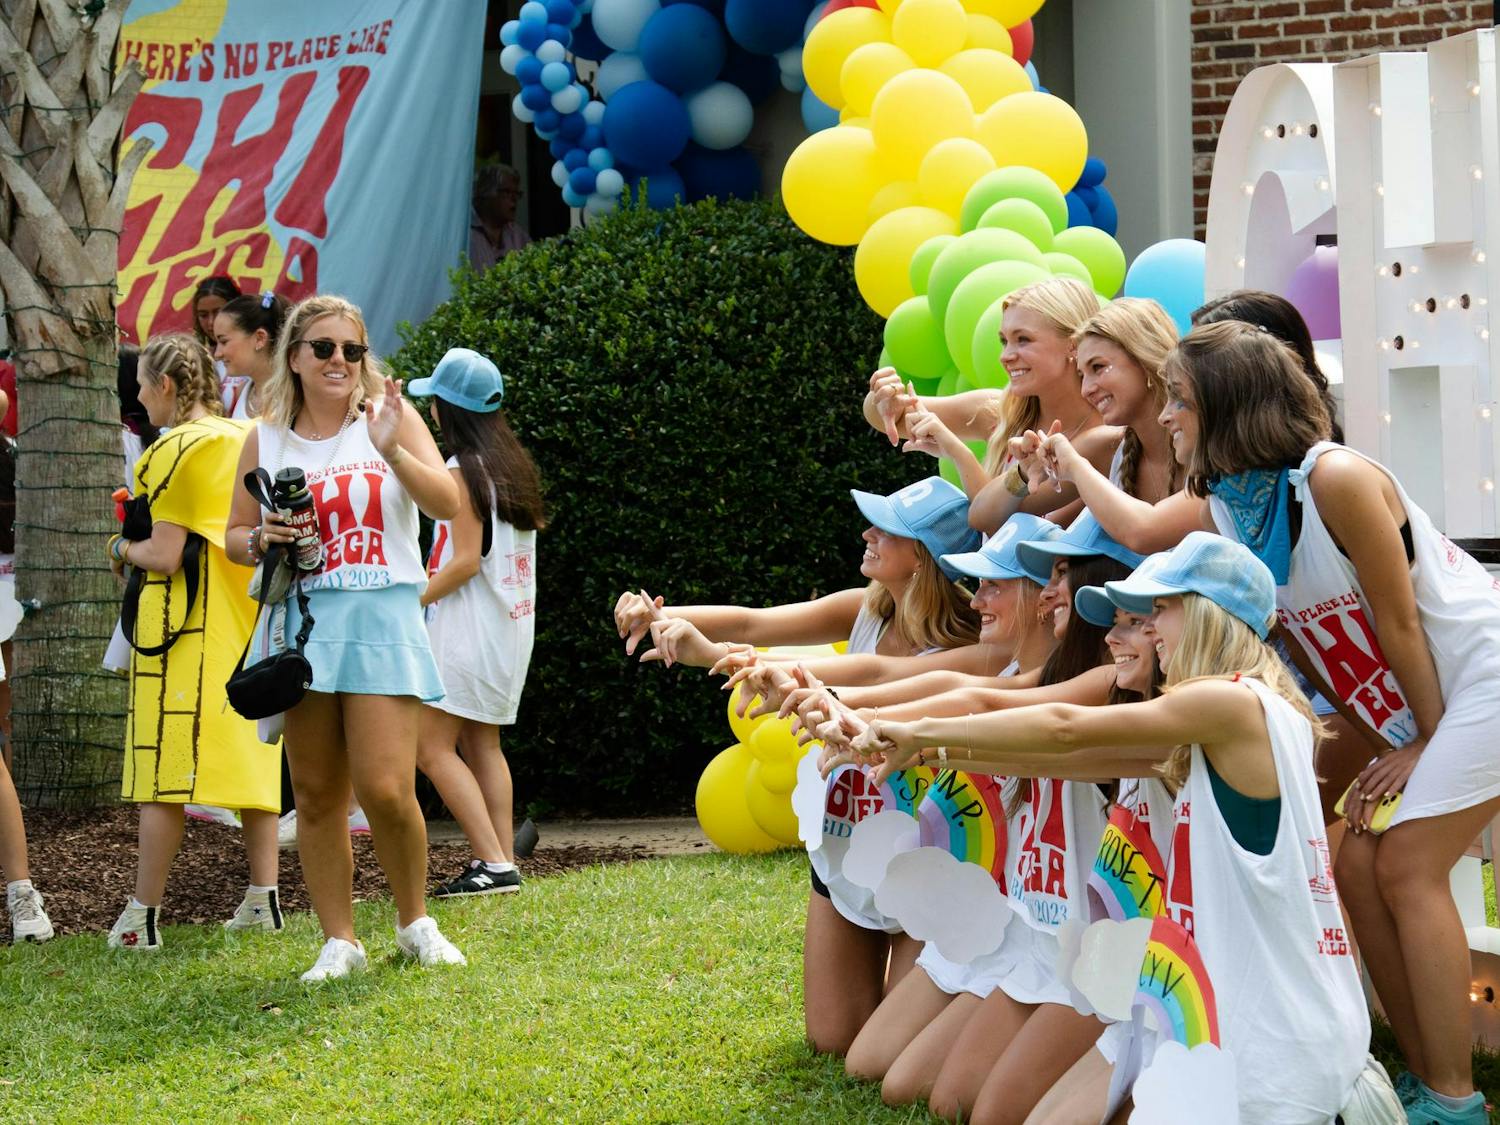 Yellow sidewalks and balloons decorate the Chi Omega house in Greek Village on Aug. 27, 2023. New members and sisters posed on the lawn for pictures to commemorate the excitement of Bid Day.